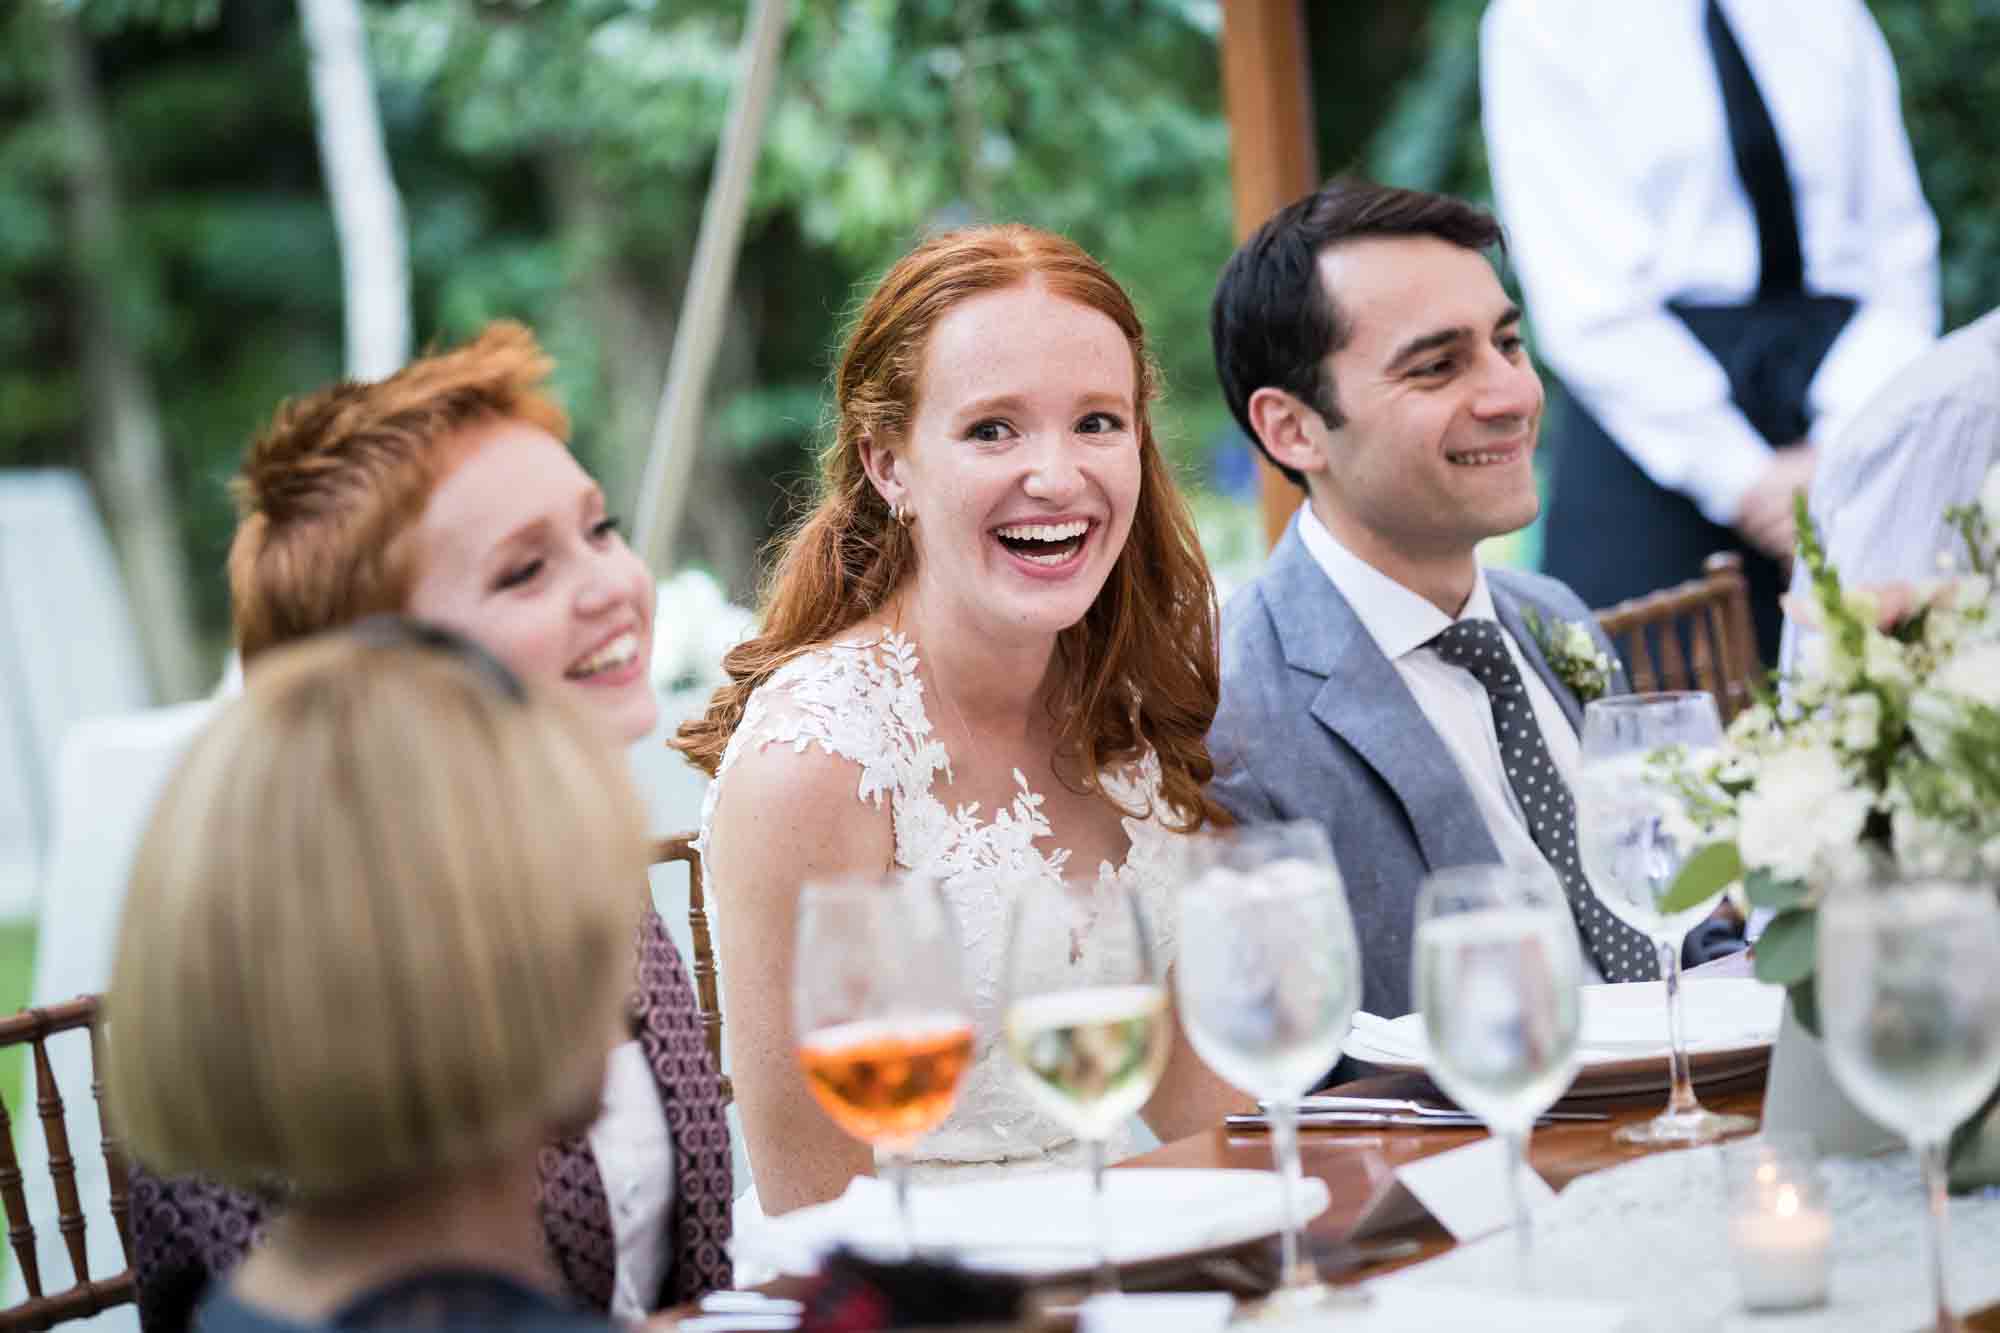 Bride and guests laughing at table for an article on backyard wedding tips